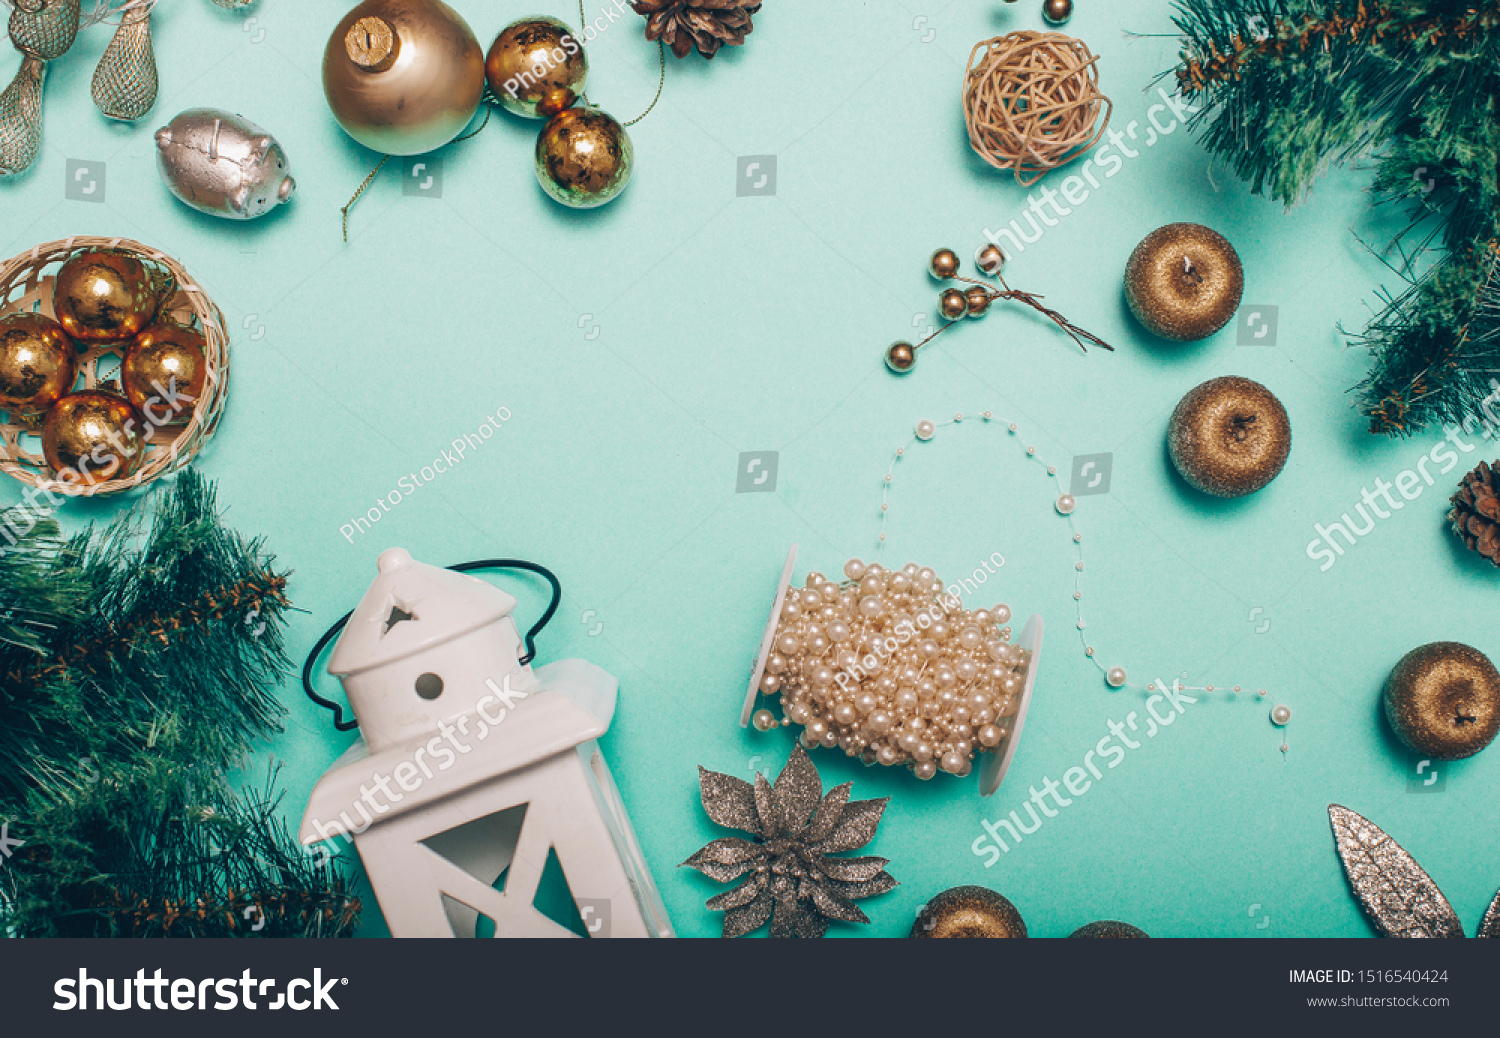 Merry Christmas Happy New Year Craftsman Stock Photo Edit Now 1516540424